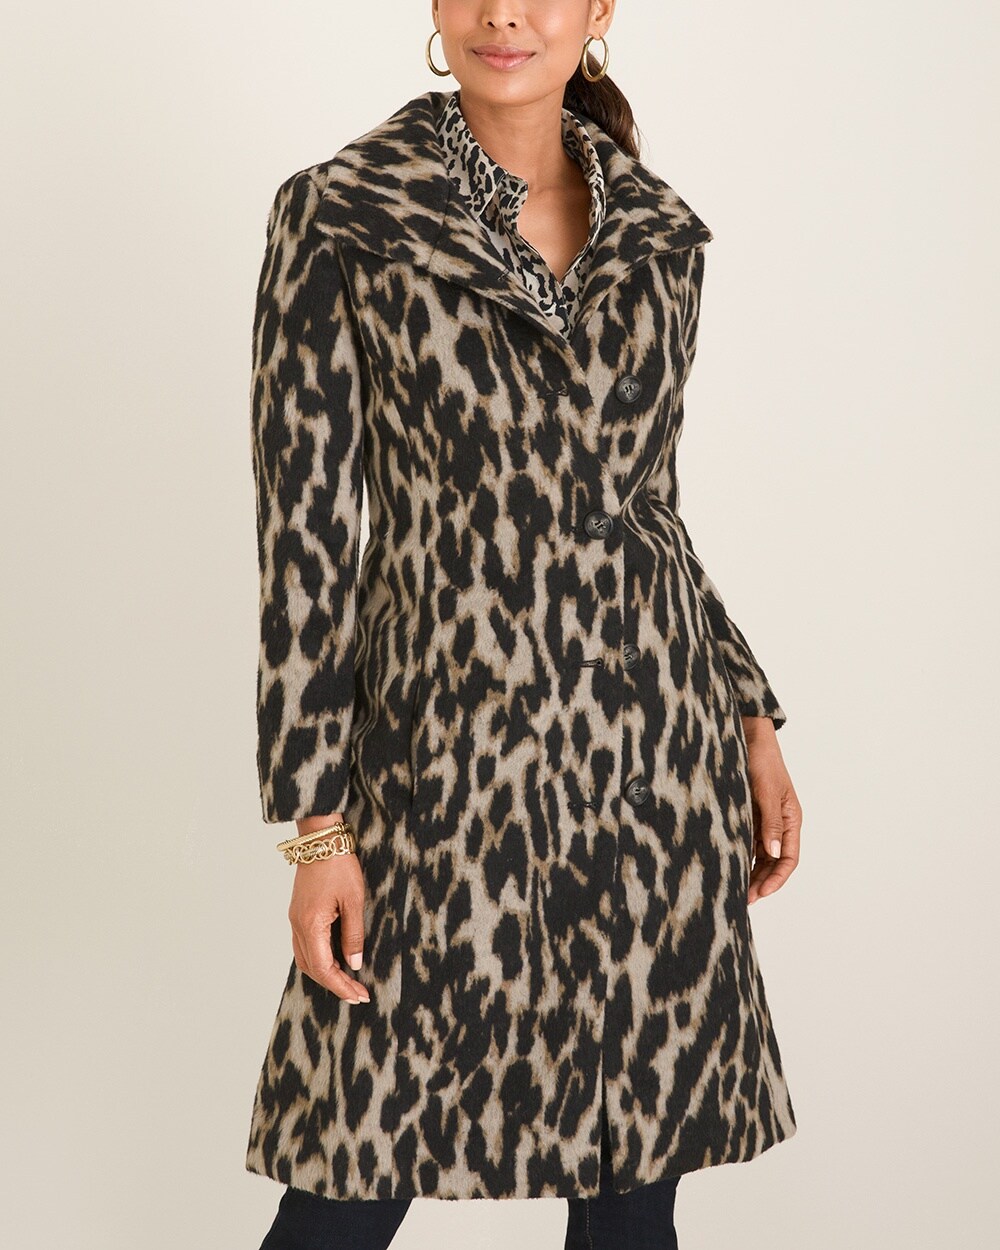 Plush Animal-Print Jacket video preview image, click to start video